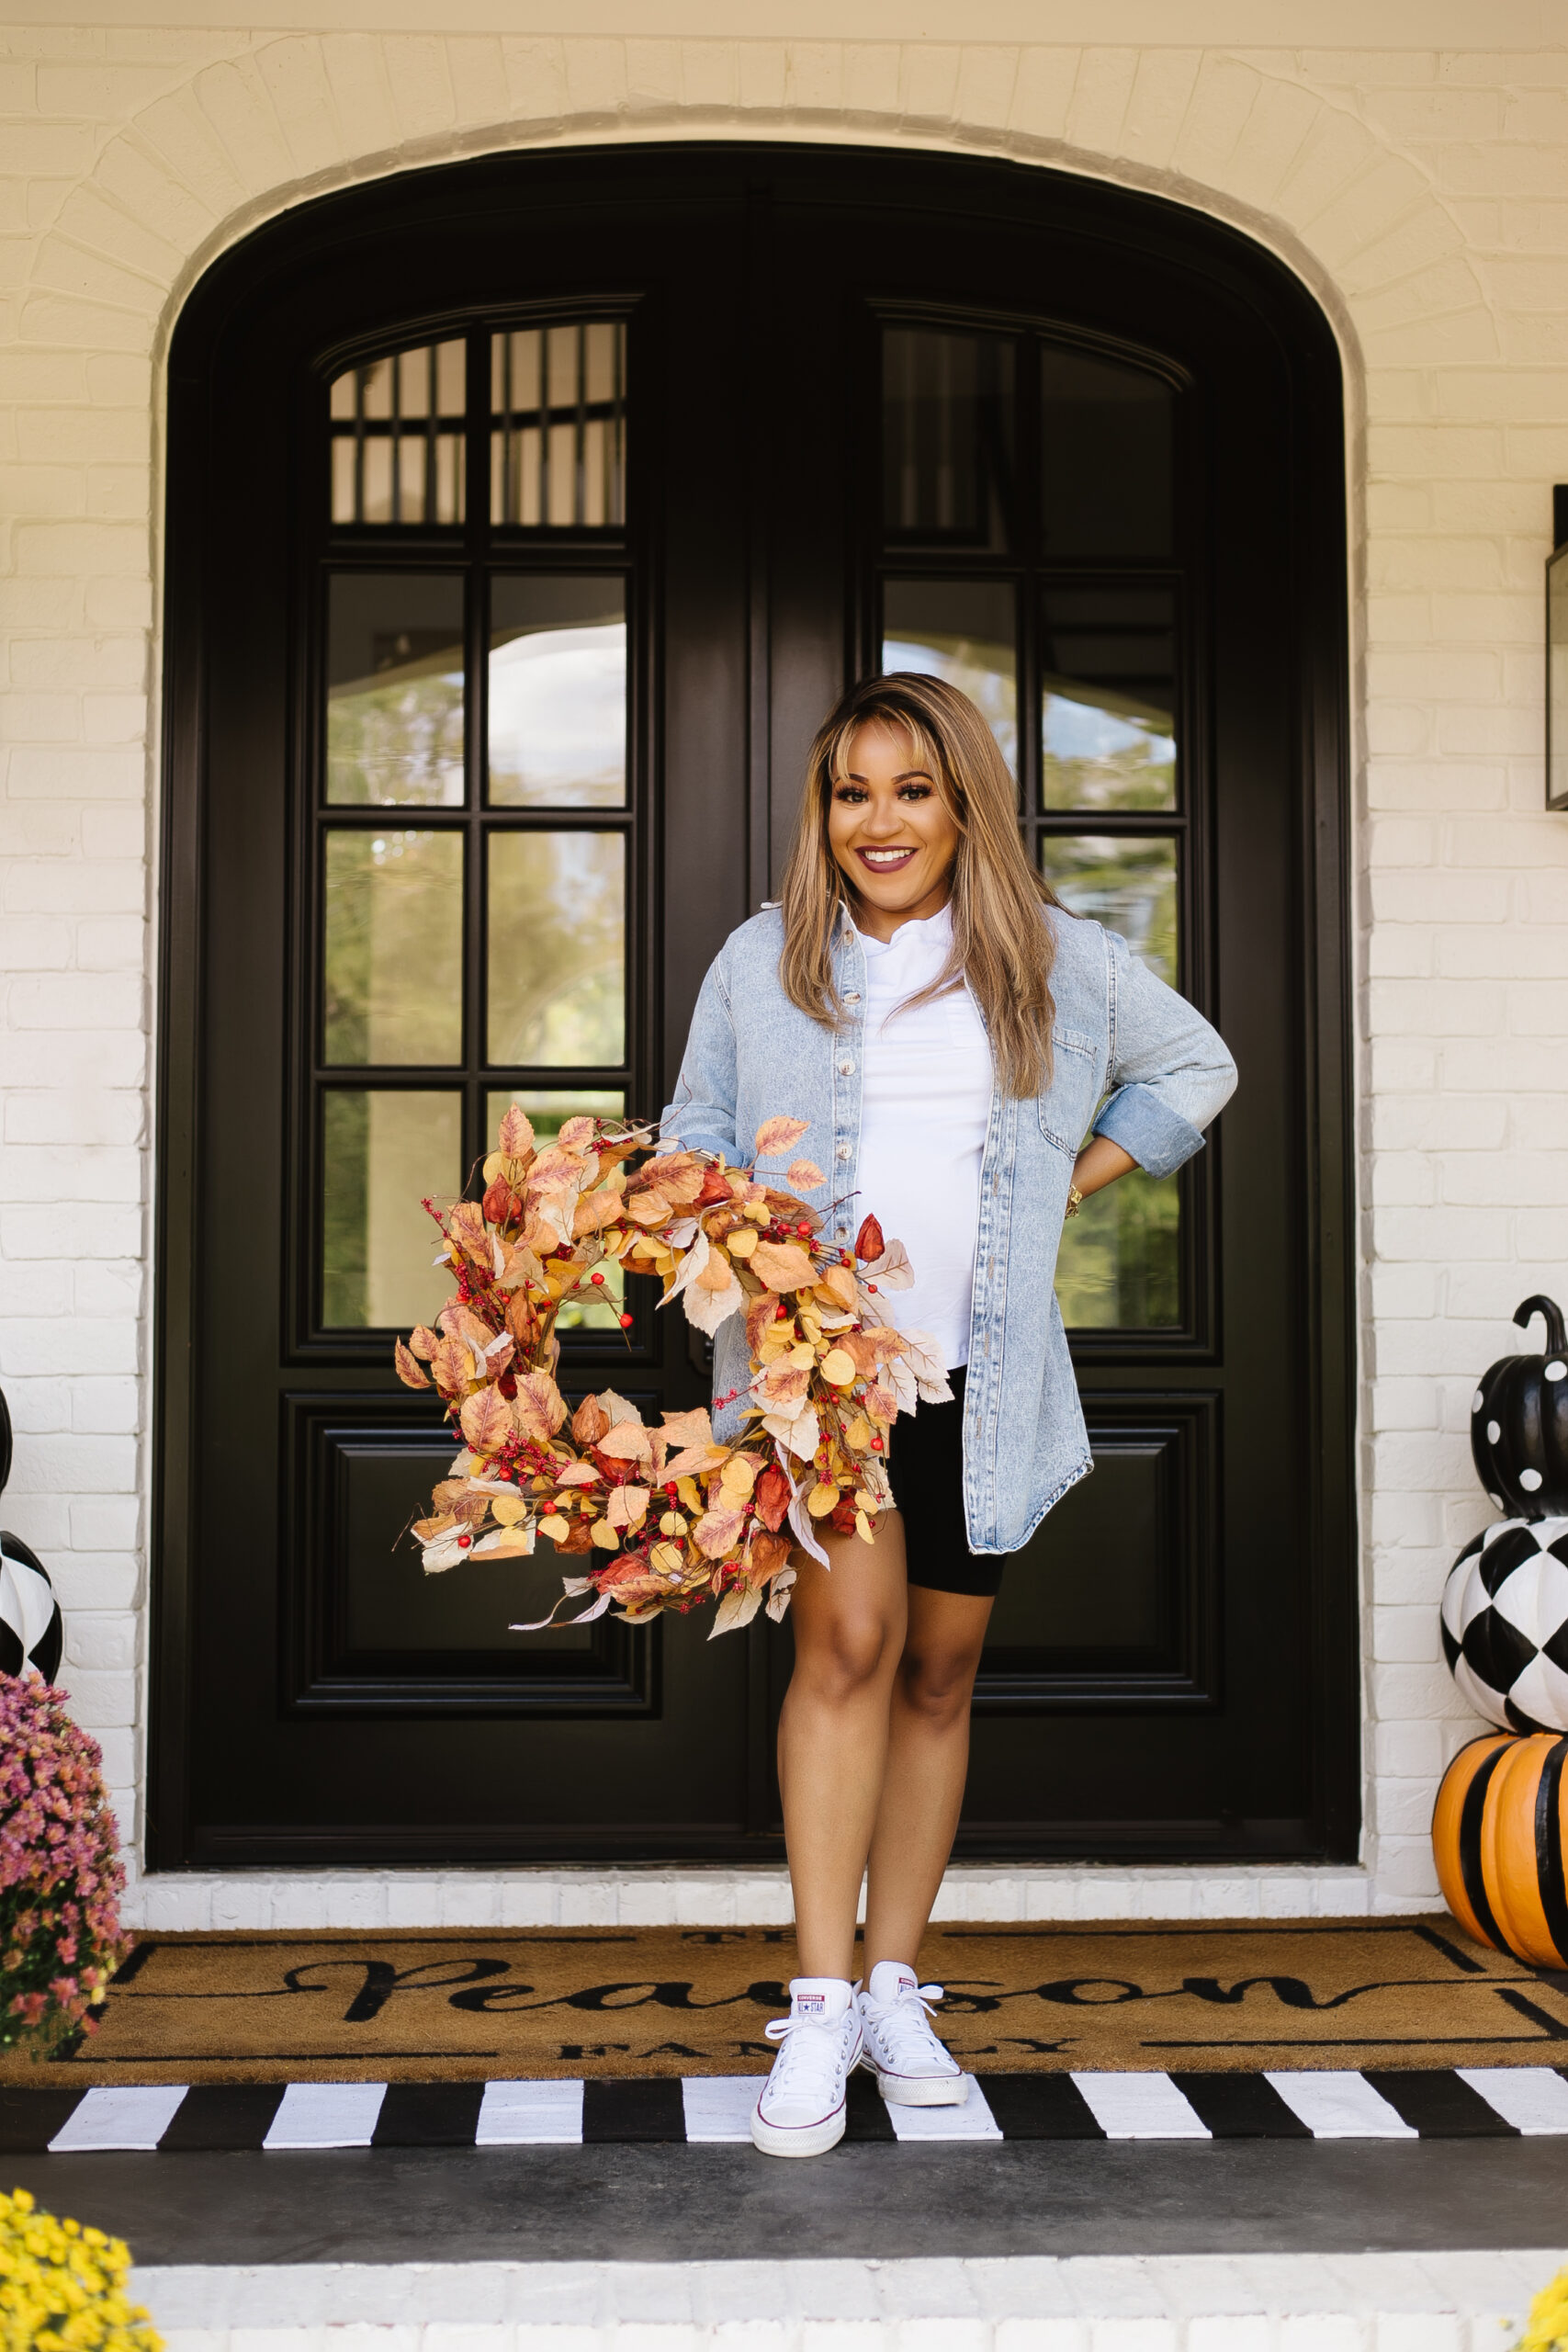 how to decorate a front porch for fall